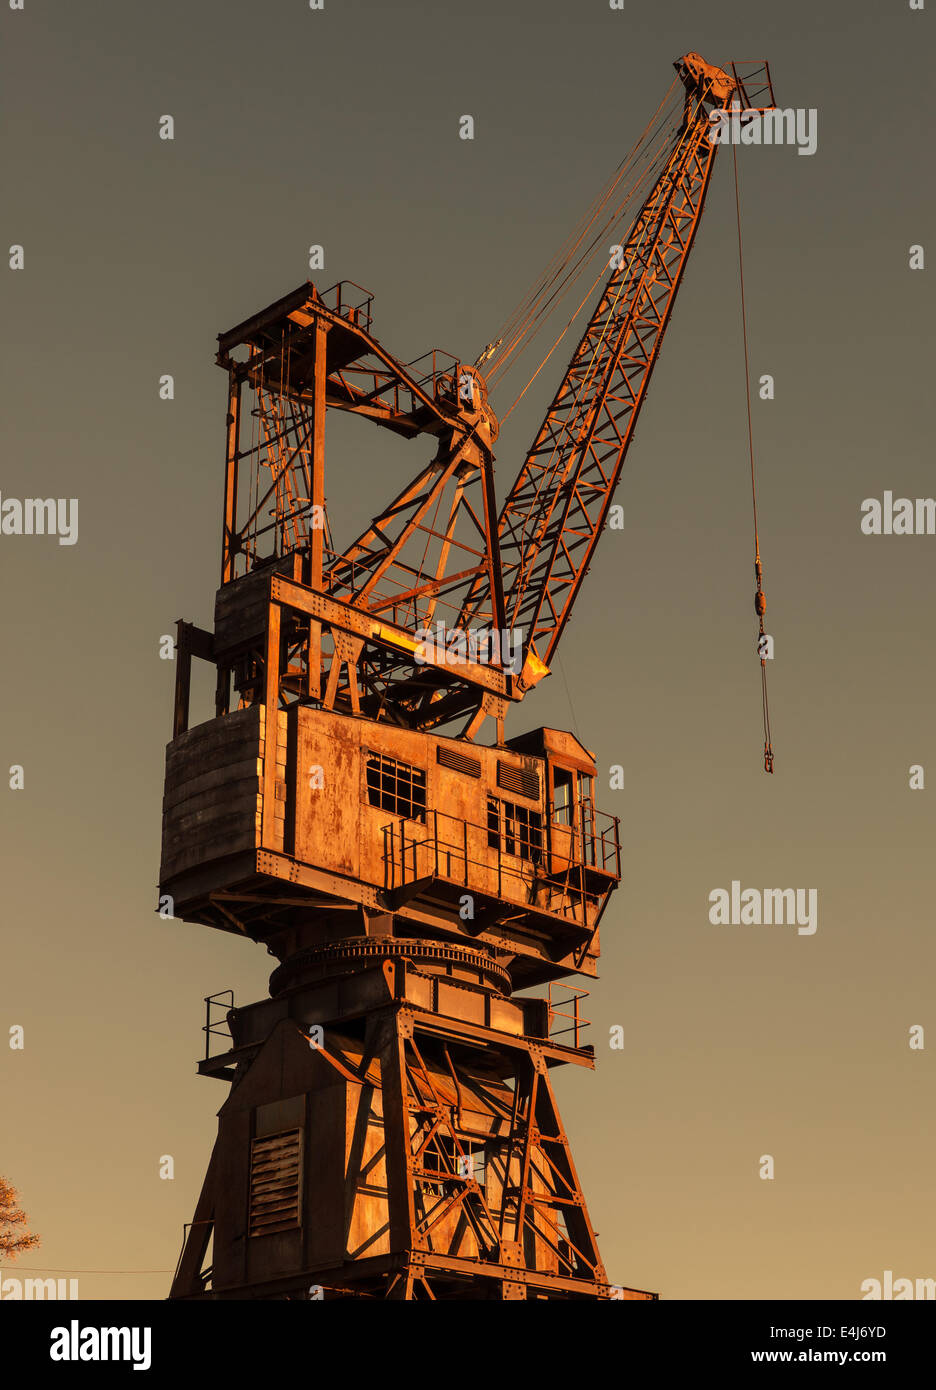 A disused dock crane at Cockatoo Island in Sydney Harbour Stock Photo